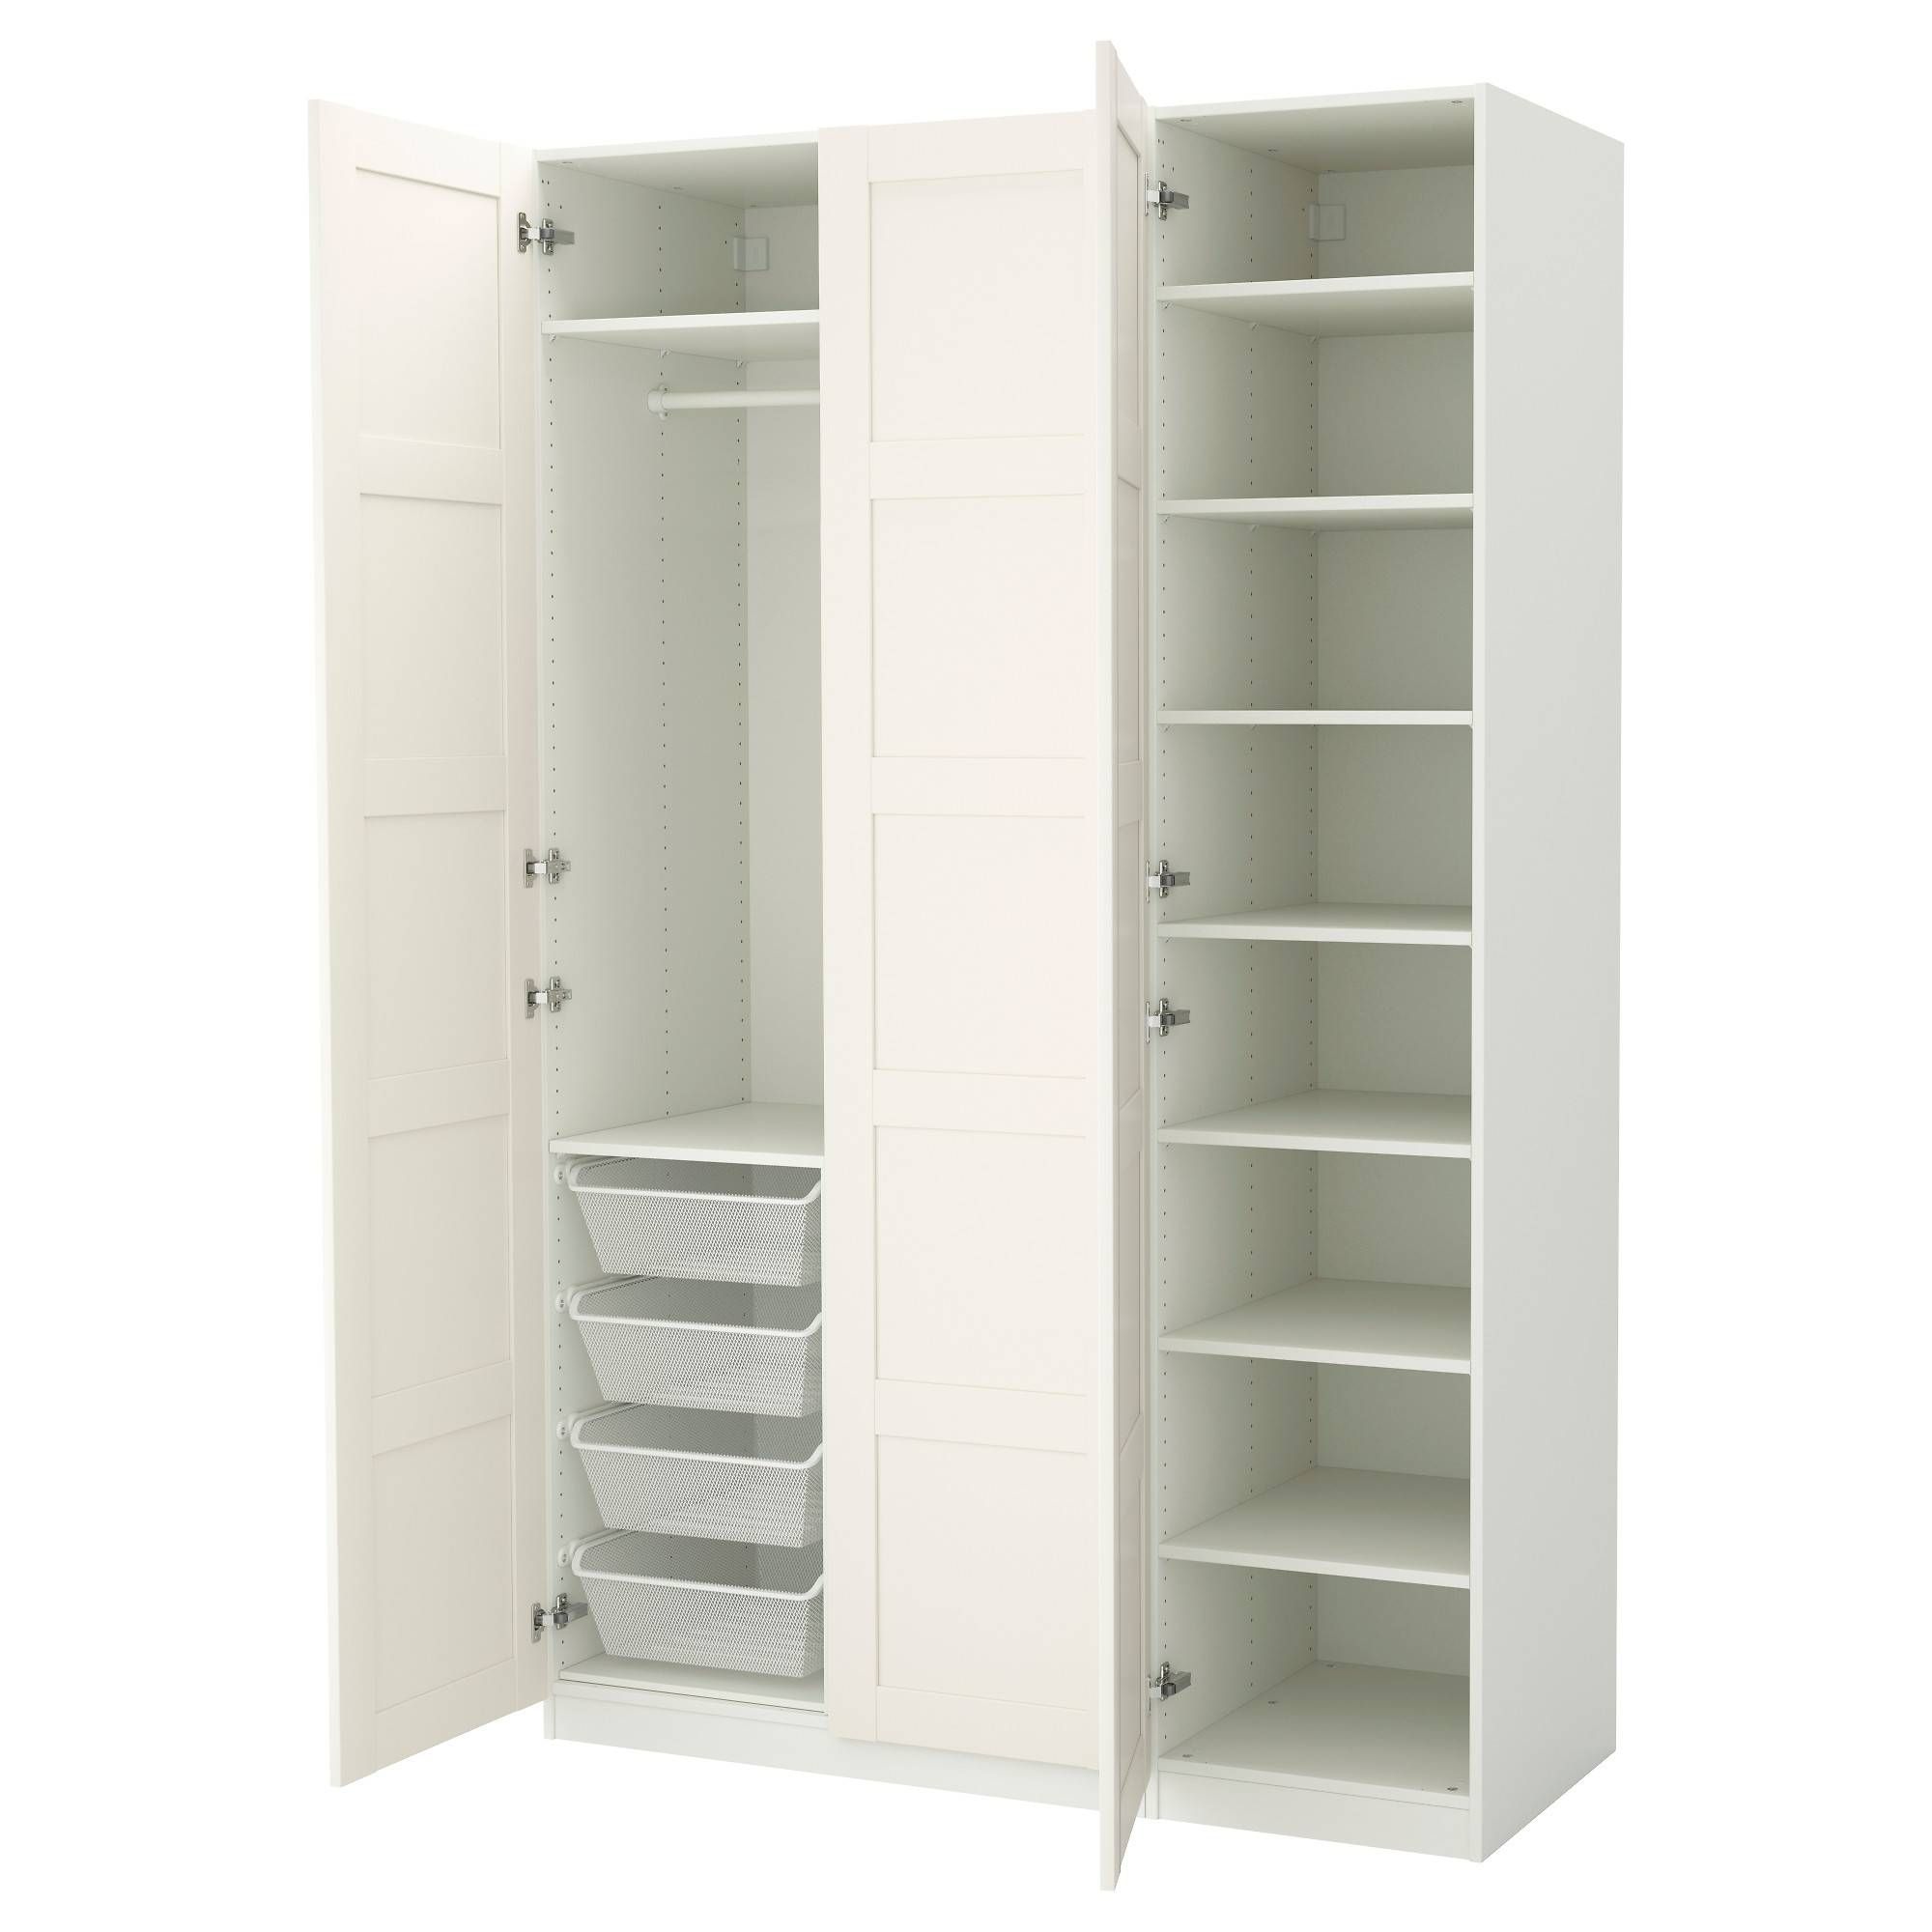 Wardrobes – Pax System – Ikea In Wardrobes With Shelves (View 18 of 30)